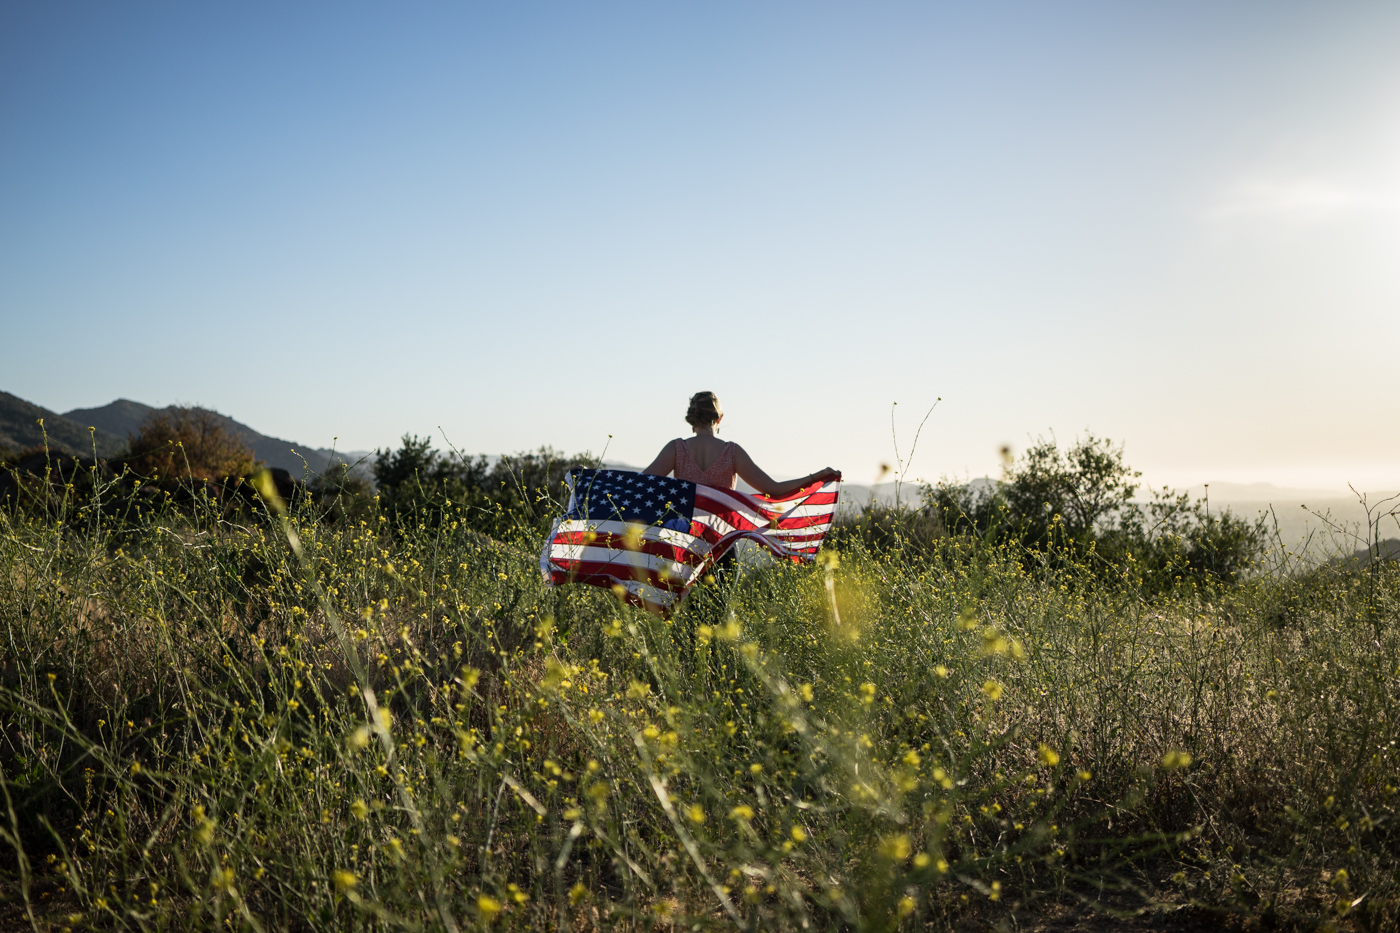 American woman with waving flag portrait in grassy wildflower meadow landscape at sunset